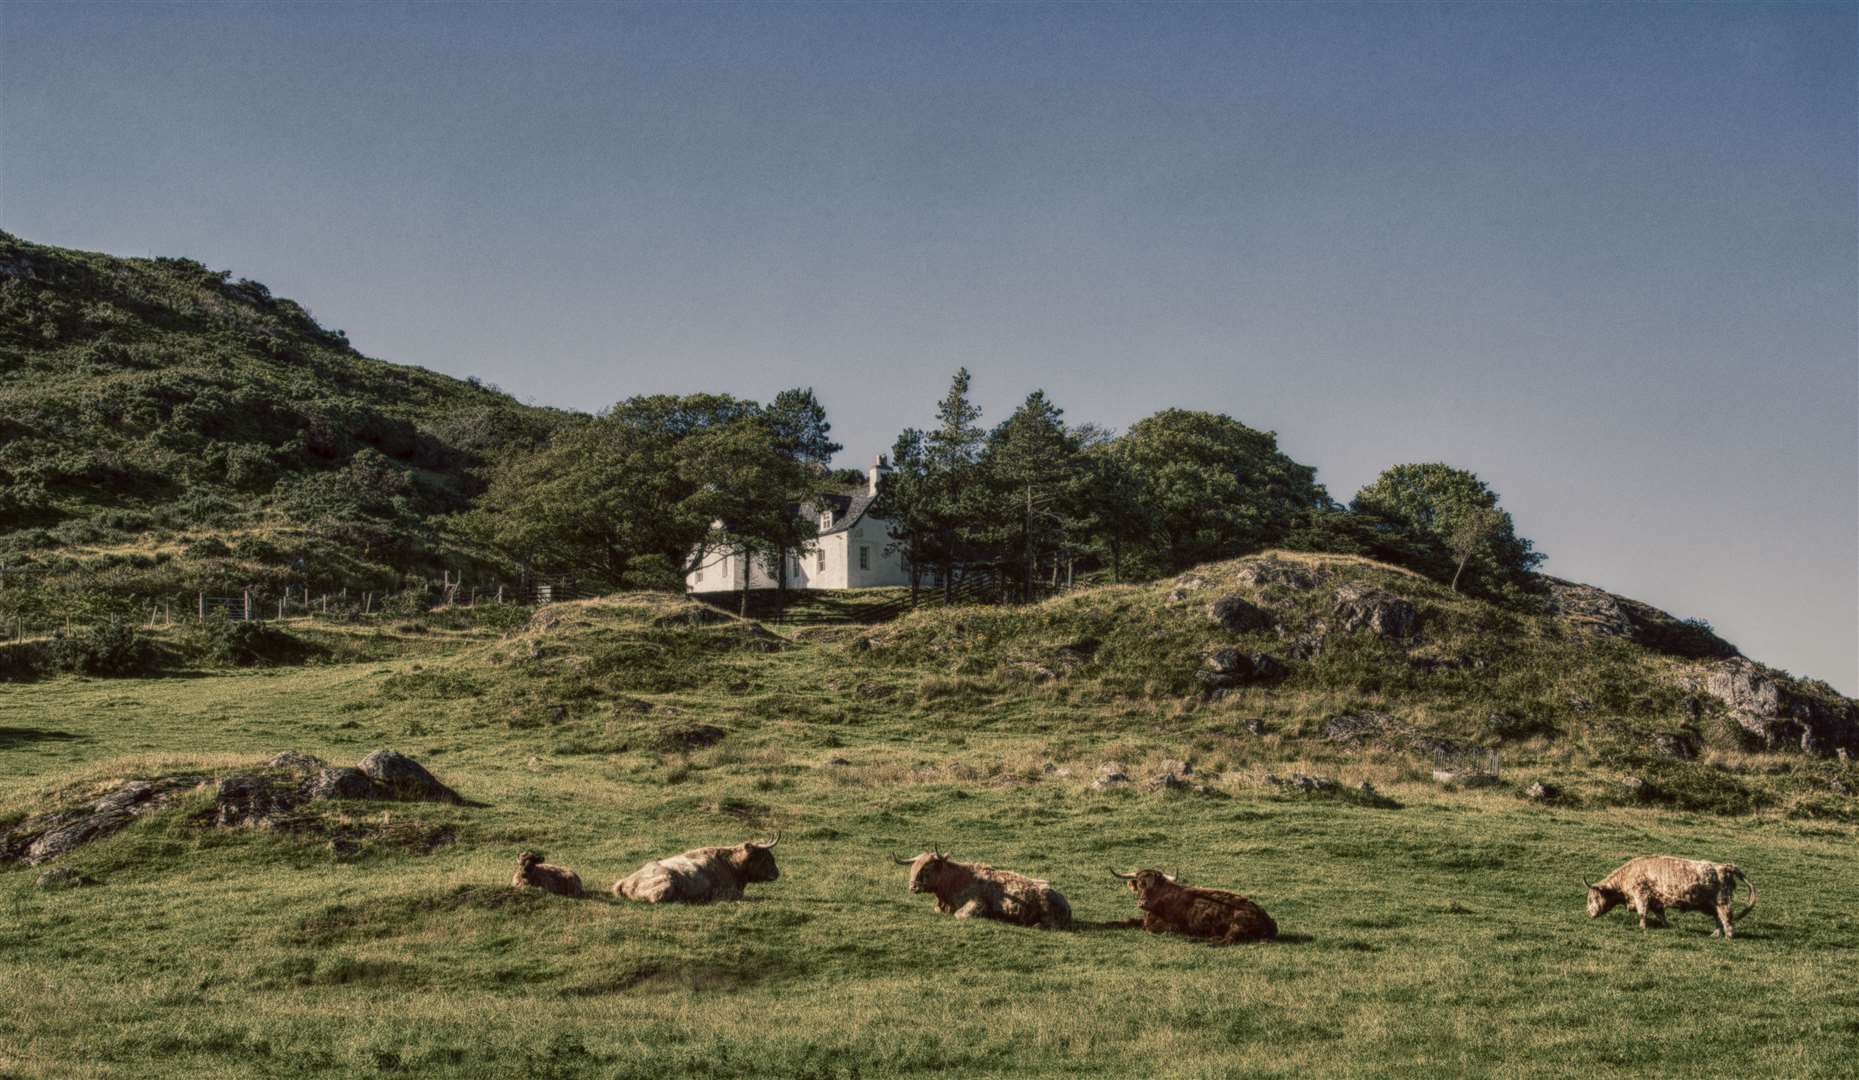 The Scottish Crofters Federation warn that the causes of rural depopulation must be addressed.